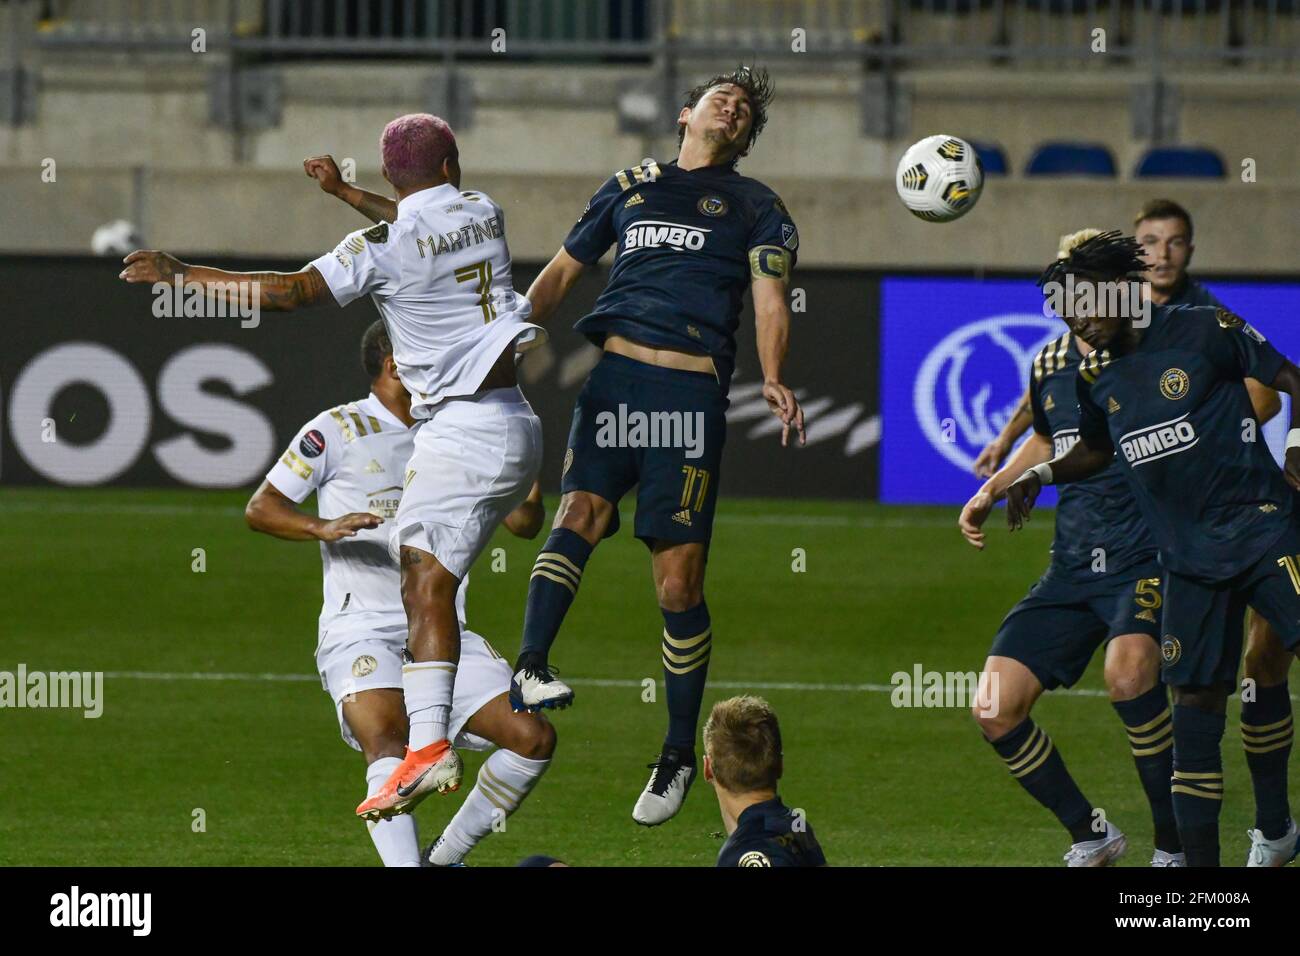 Philadelphia, PA, USA - 4th, May, 2021 - Joef Martinez and Alejandro Bedoya compete for a header during a 1-1 2nd leg tie. the Philadelphia Union advance to the semi-finals with a 4-1 aggregate score. Credit: Don Mennig/Alamy Live News Stock Photo